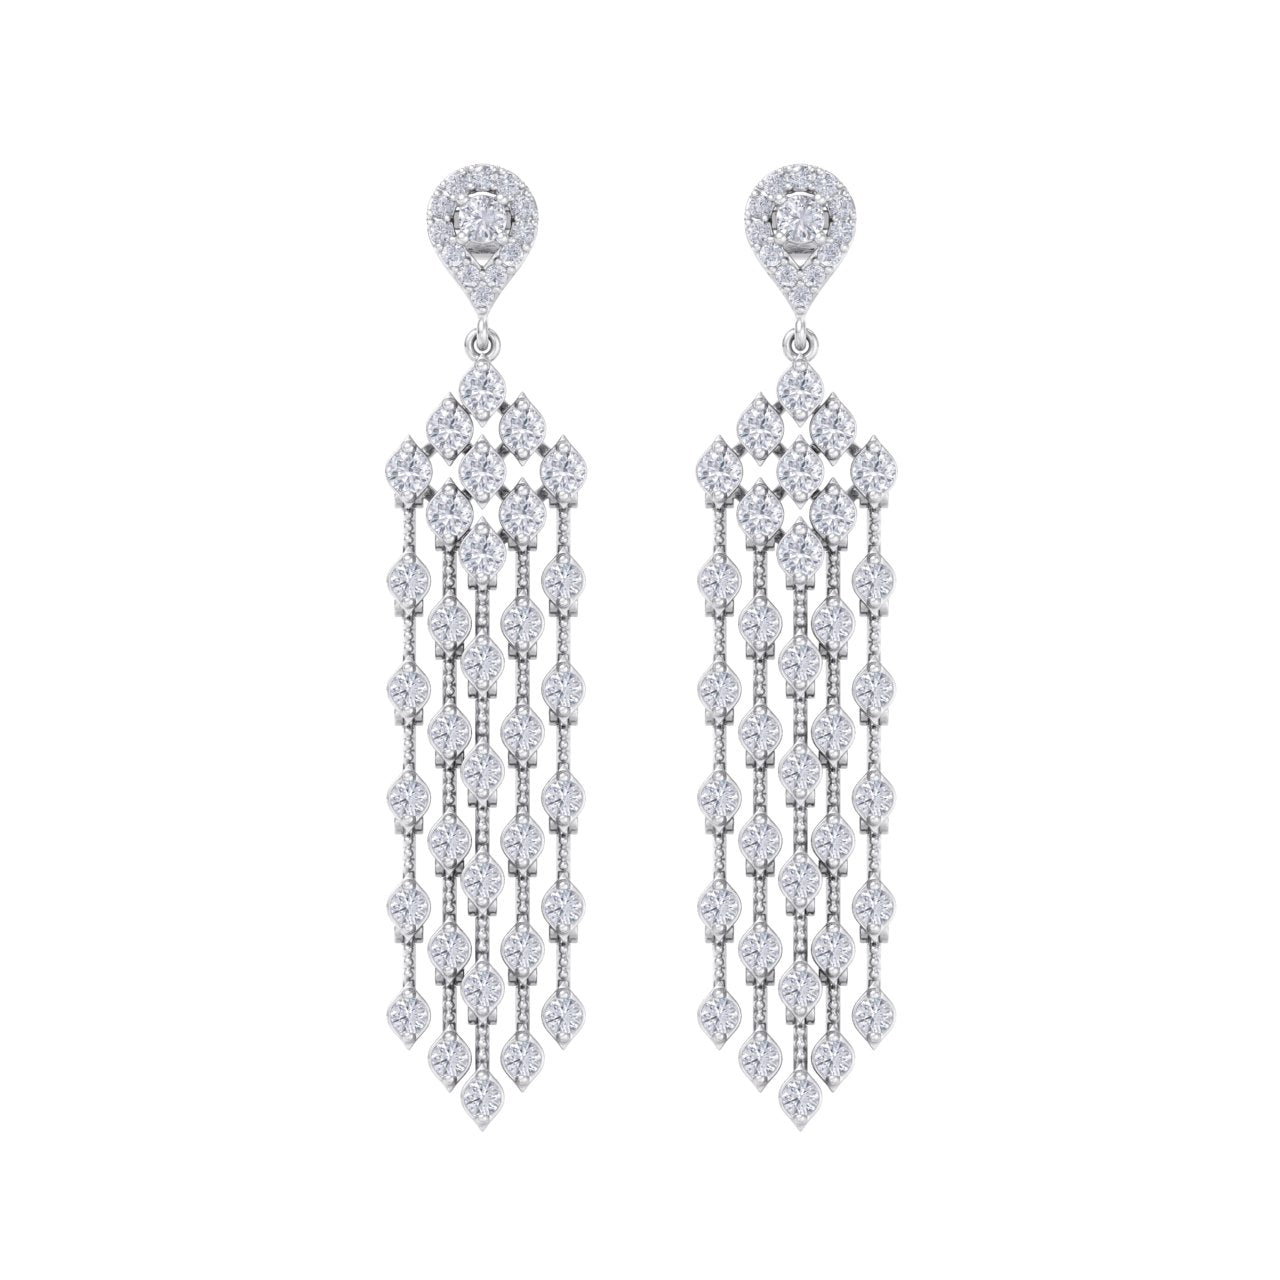 Chandelier earrings in white gold with white diamonds of 4.09 ct in weight